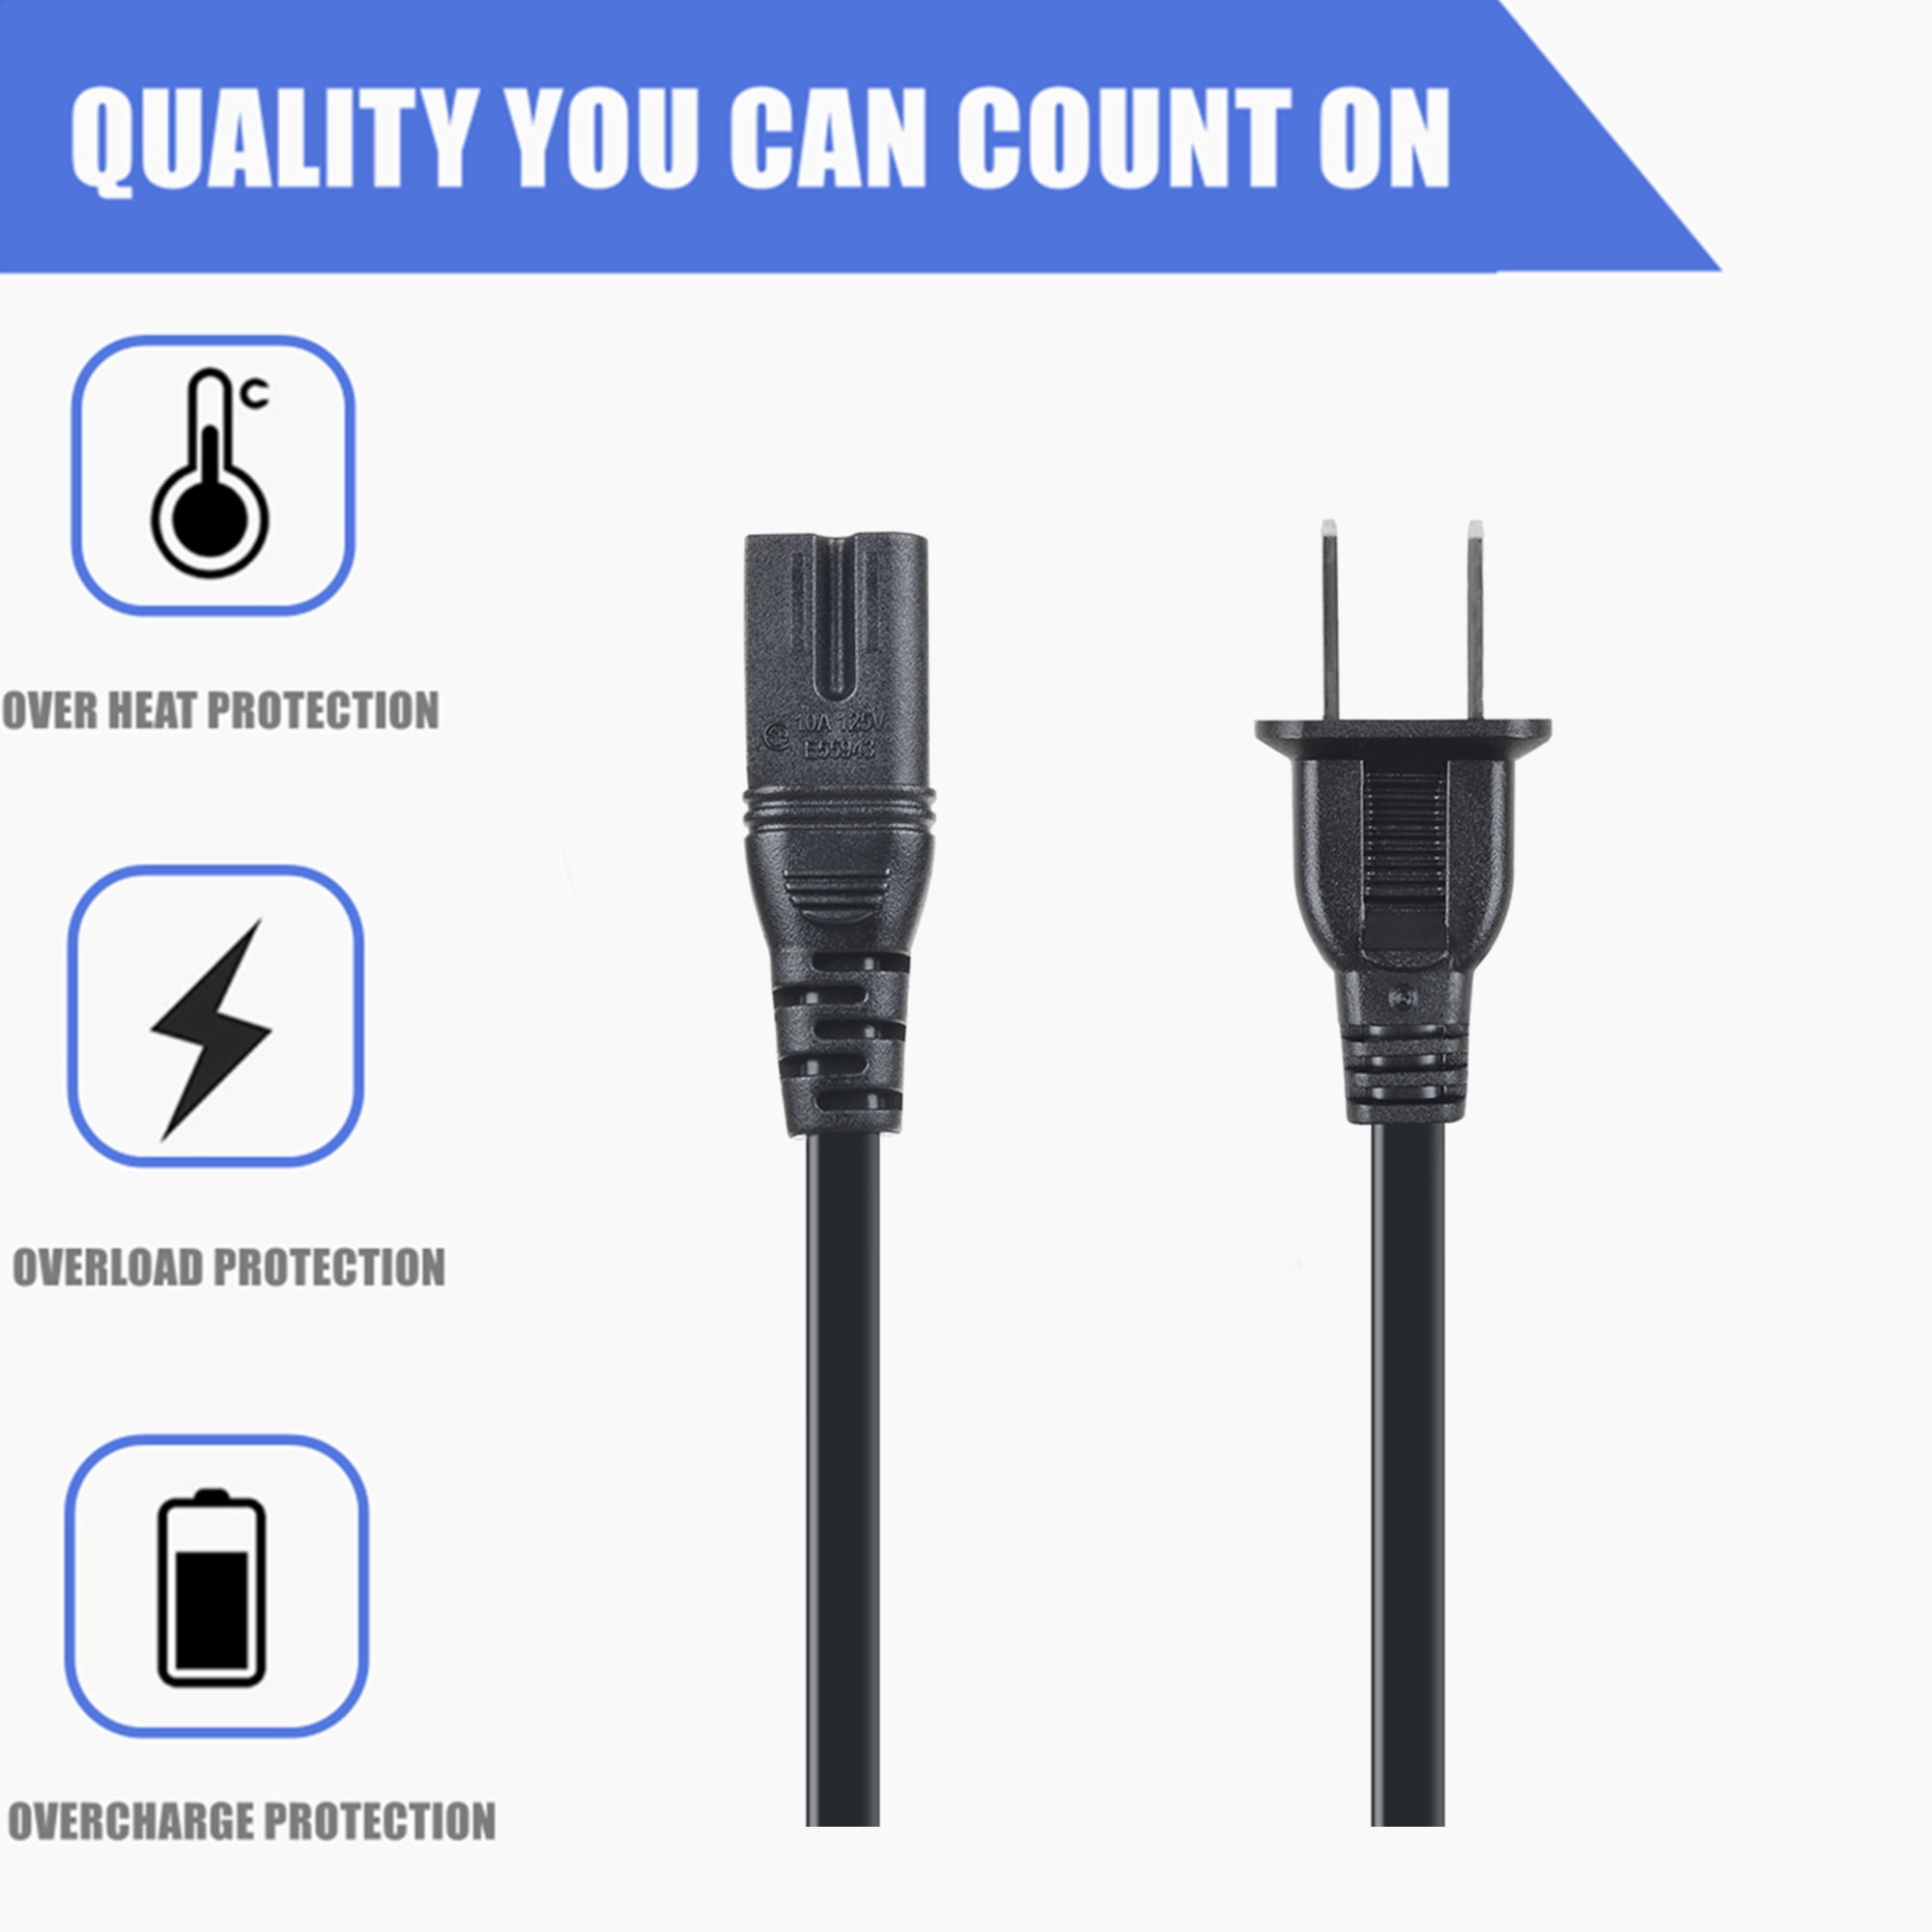 5ft AC Power Cord Outlet Socket Cable Plug Lead for The Singing Machine GPX J100S CD+G Portable Karaoke Party Singing Machine System SMDigital SM Digital CDG Karaoke System UL Listed Accessory USA